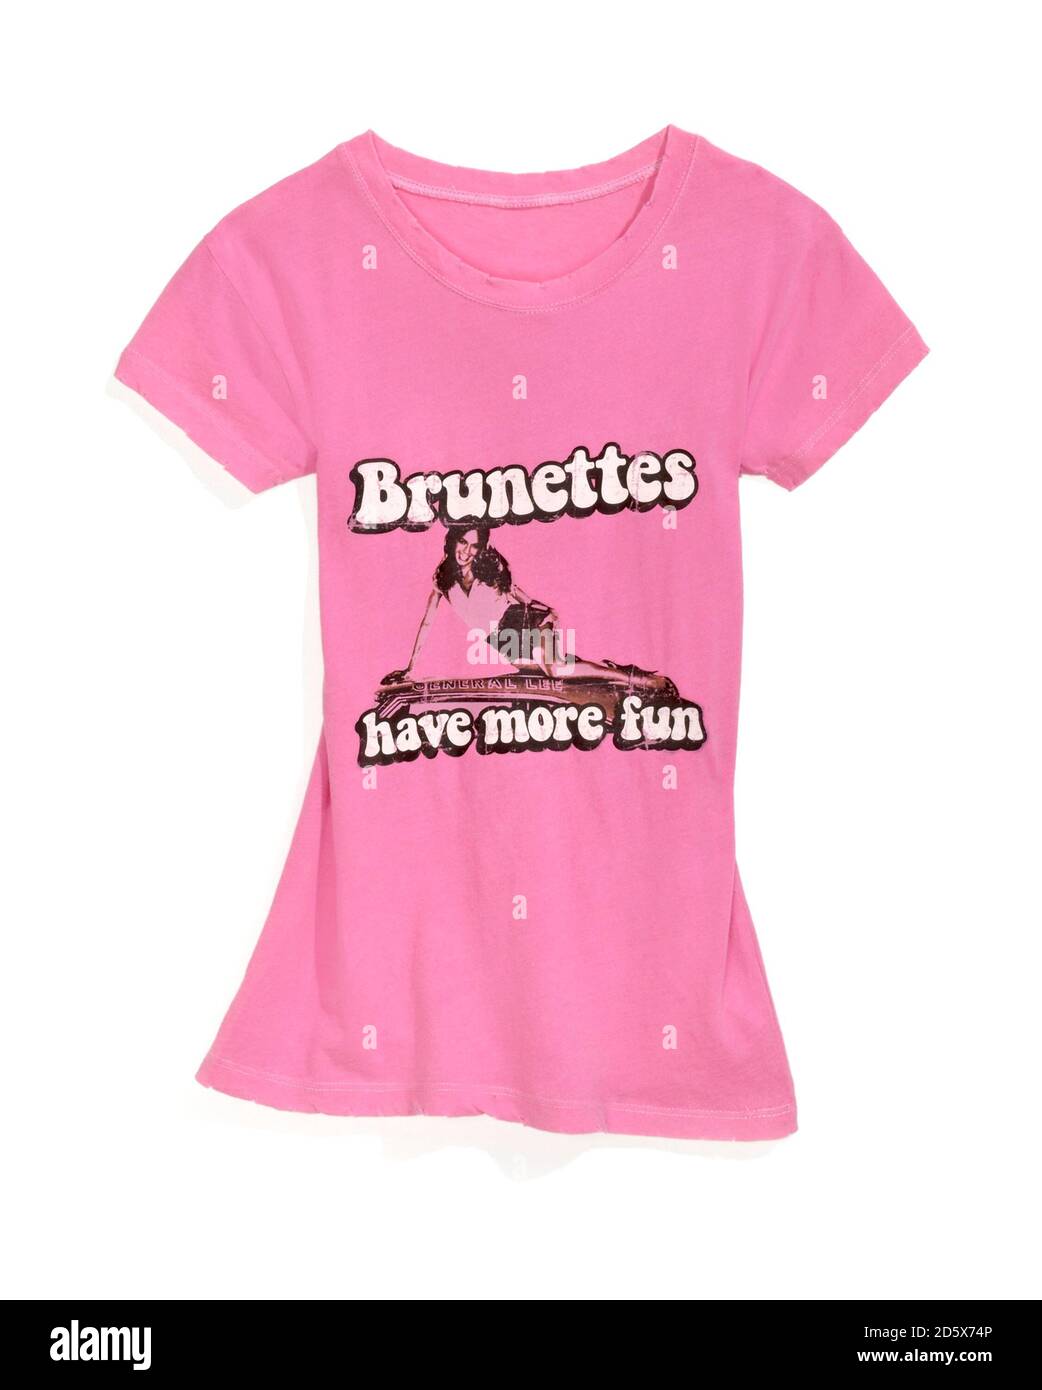 Pink brunettes have more fun t-shirt photographed on a white background Stock Photo